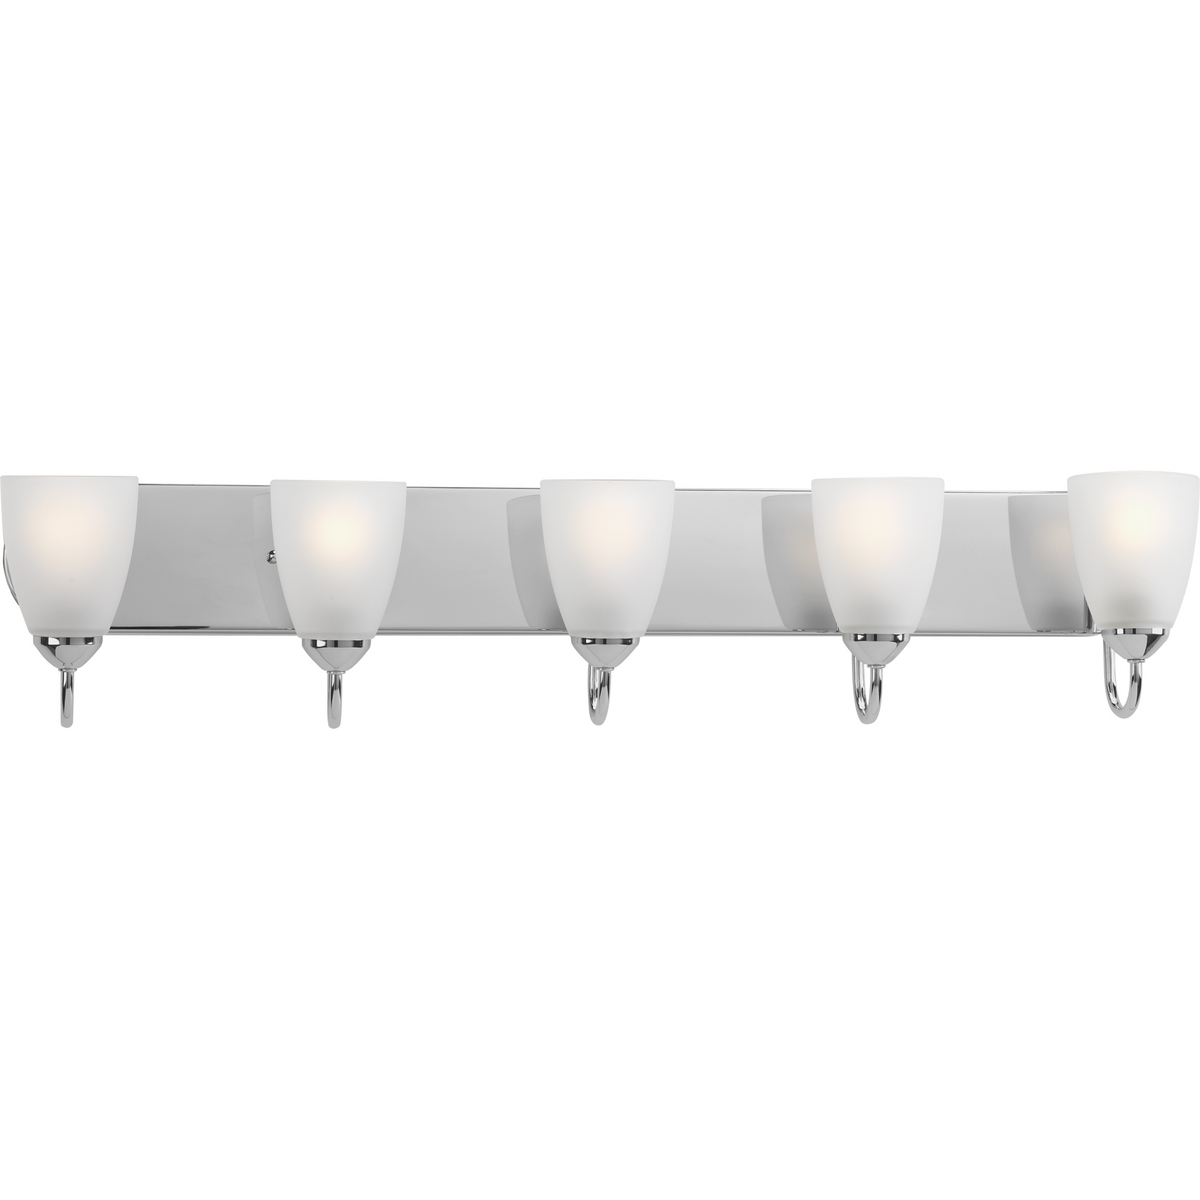 Gather possesses a smart simplicity to complement today's home. This five-light bath bracket contains etched glass shades which add distinction and provide pleasing illumination to your room. Featuring a stunning Polished Chrome finished frame, this collection allows you to decorate an entire home with confidence and style.